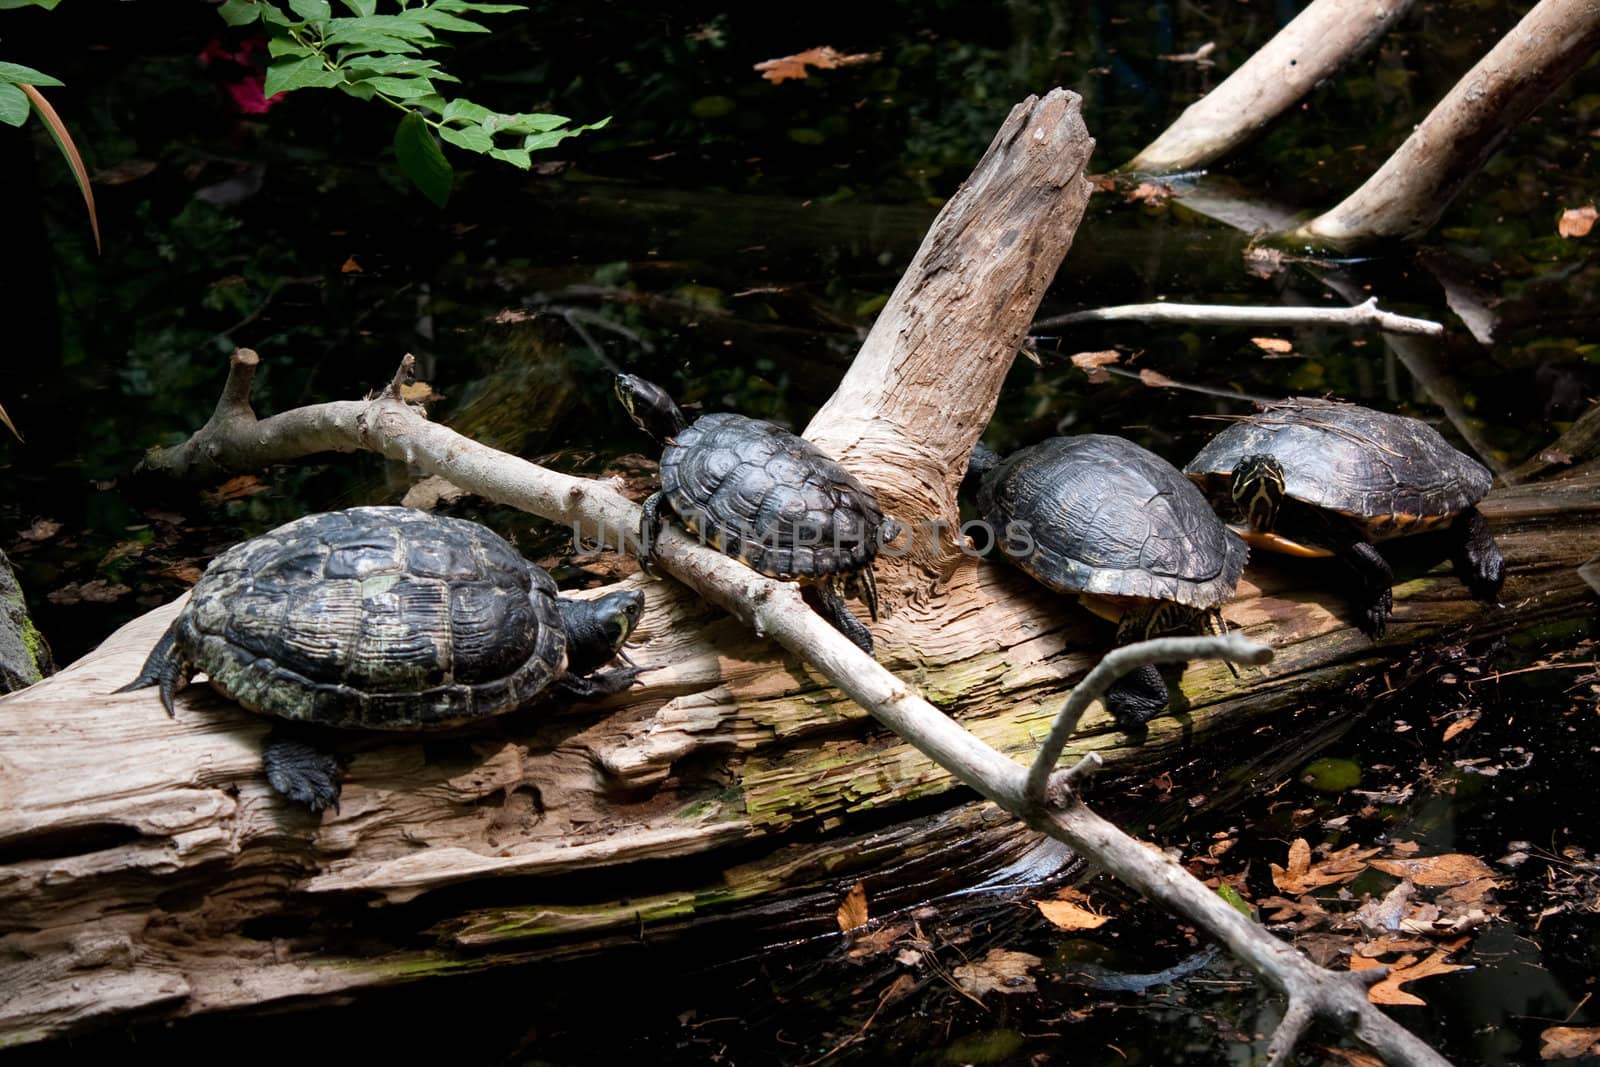 Four Turtles Resting on a Log by graficallyminded